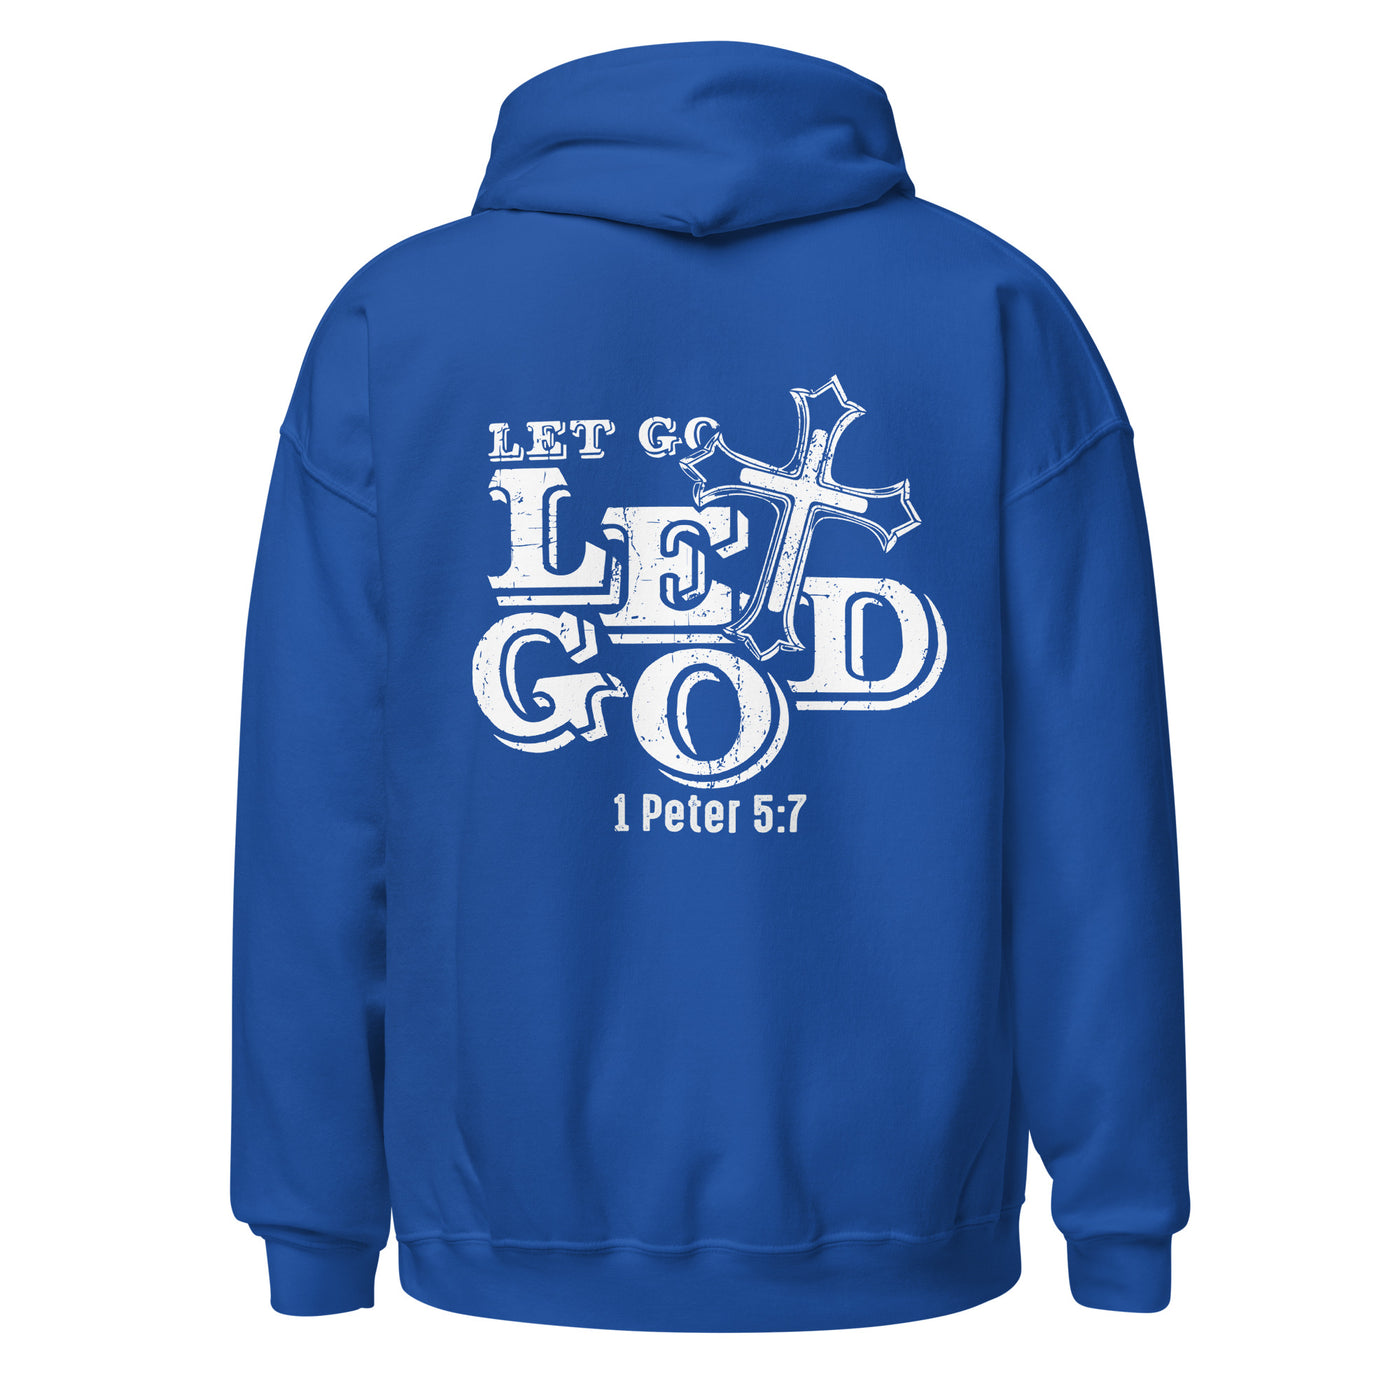 F&H Let Go Let God Two-Sided Hoodie